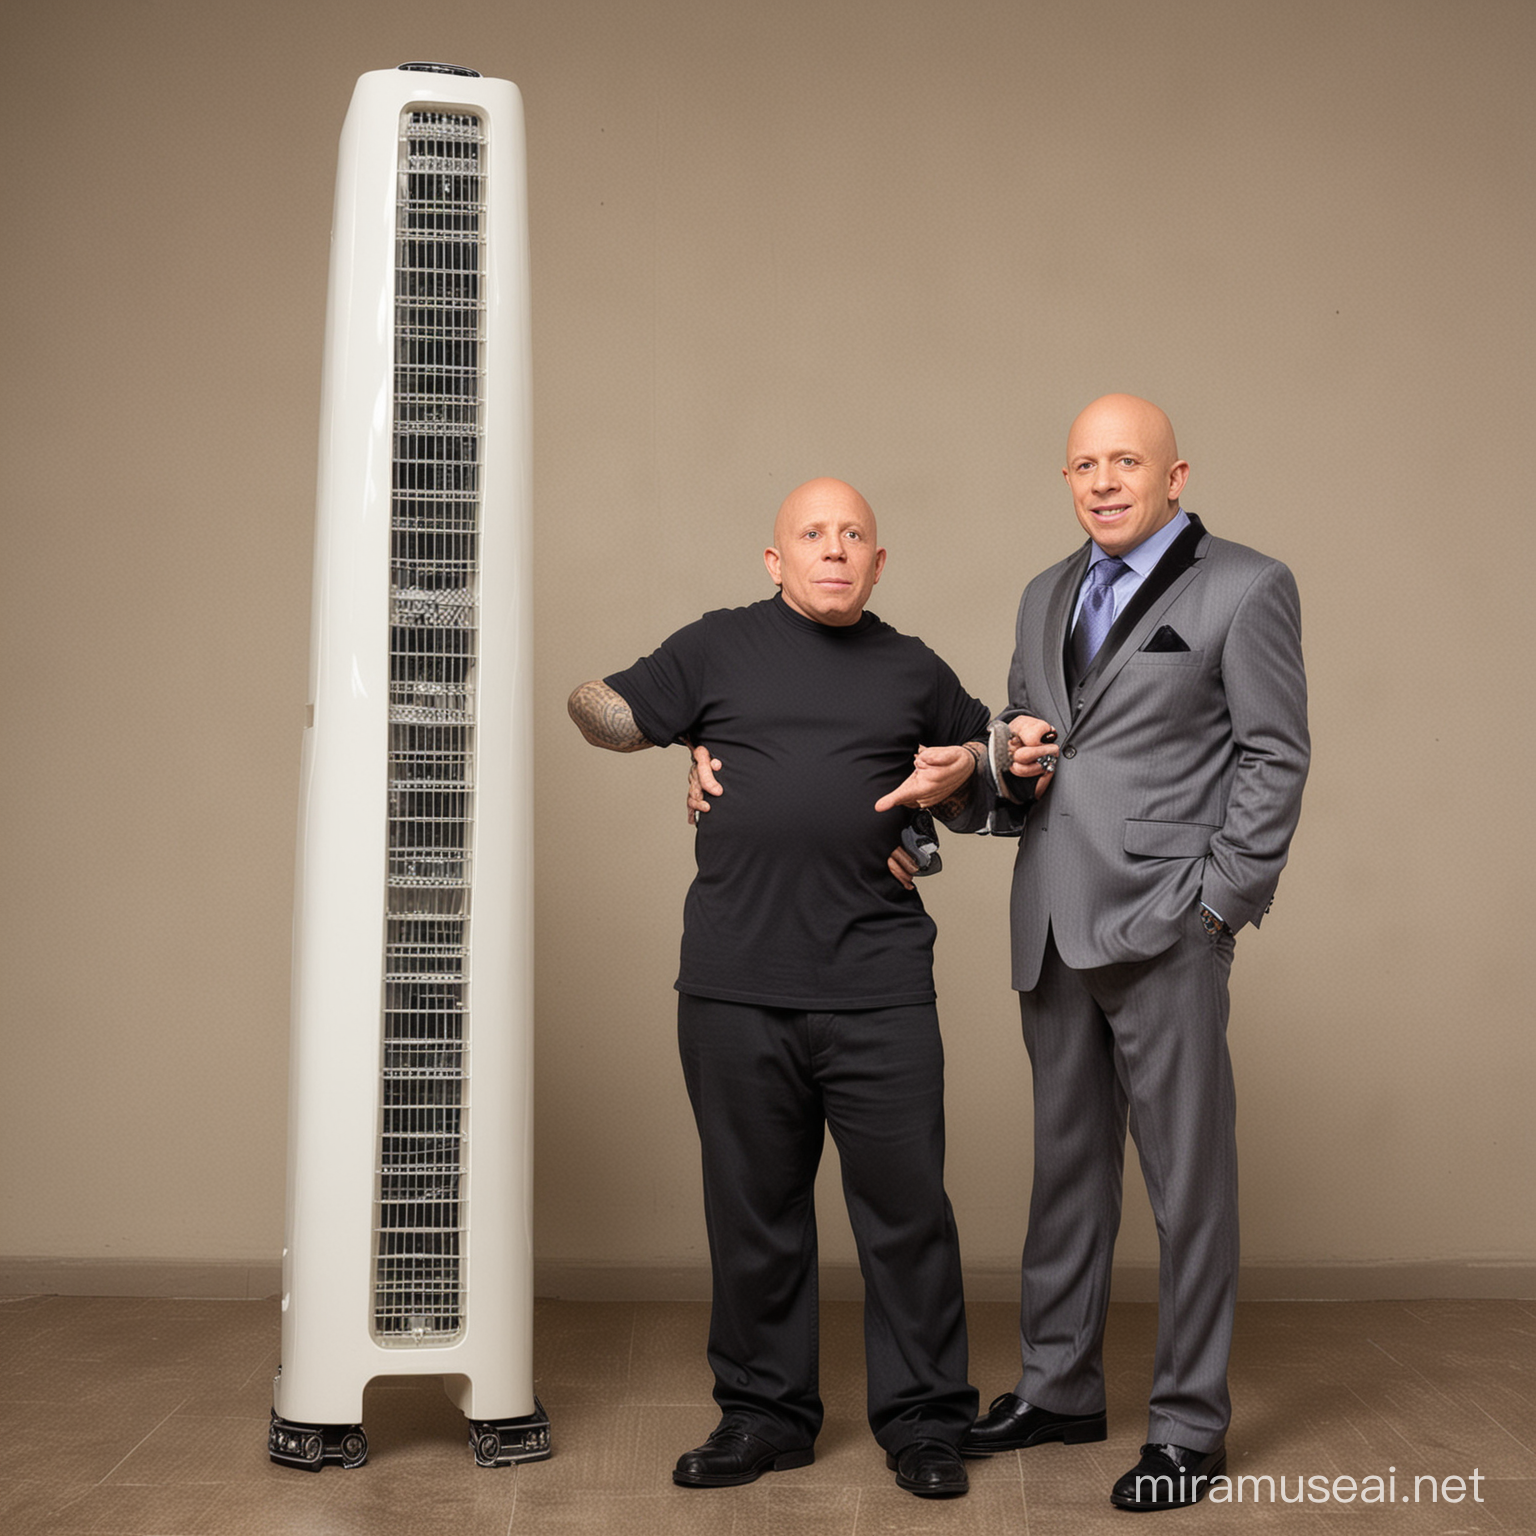 A box fan as tall as a skyscraper, next to verne troyer